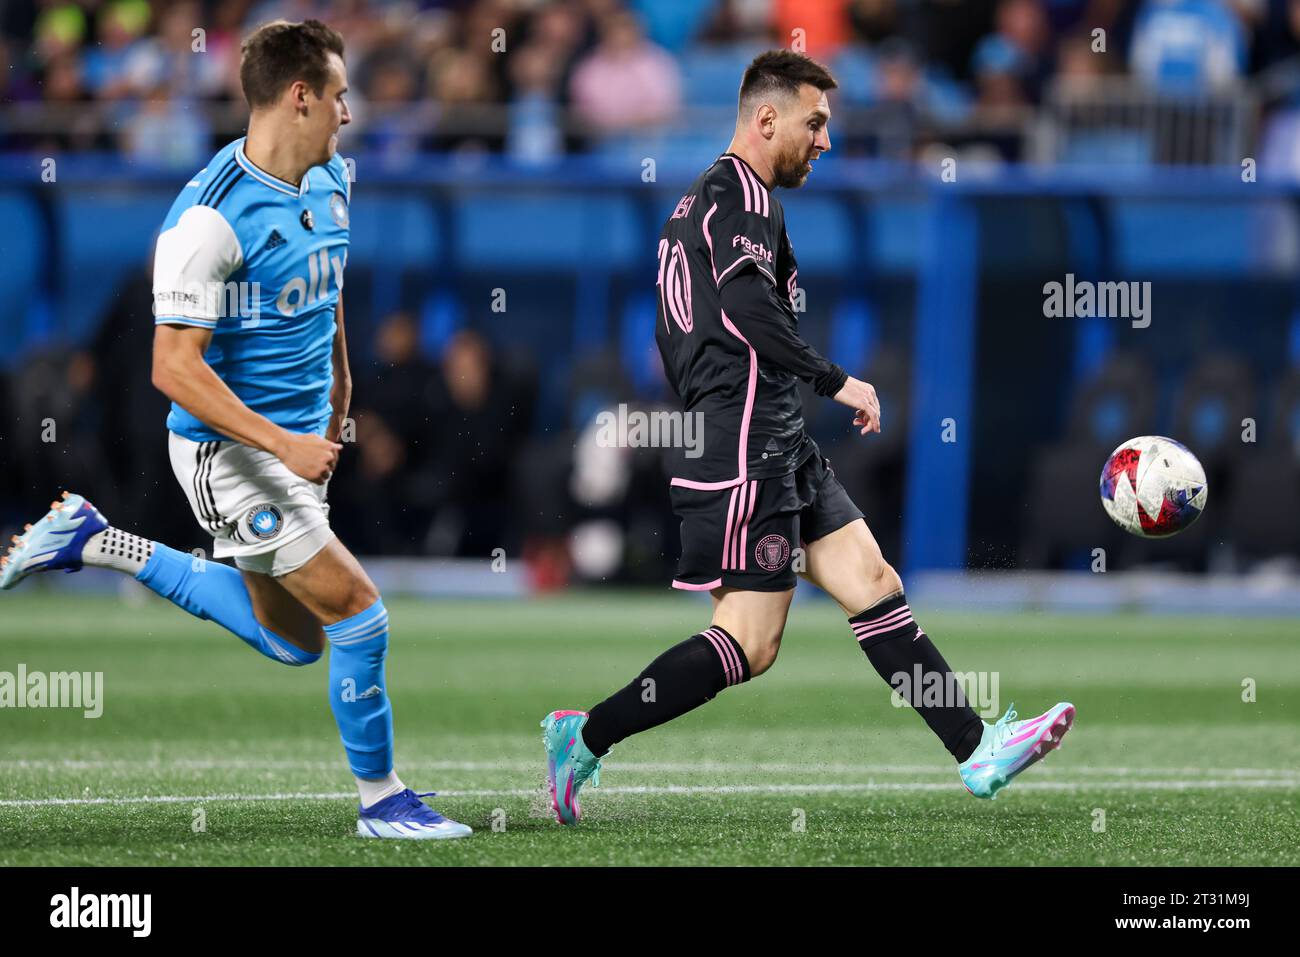 Charlotte, North Carolina, USA. 21st Oct, 2023. Inter Miami forward Lionel Messi (10) lobs the ball over the Charlotte FC keeper, but the goal was overruled during the MLS soccer match between Inter Miami CF and Charlotte FC at Bank of America Stadium in Charlotte, North Carolina. Greg Atkins/CSM/Alamy Live News Stock Photo